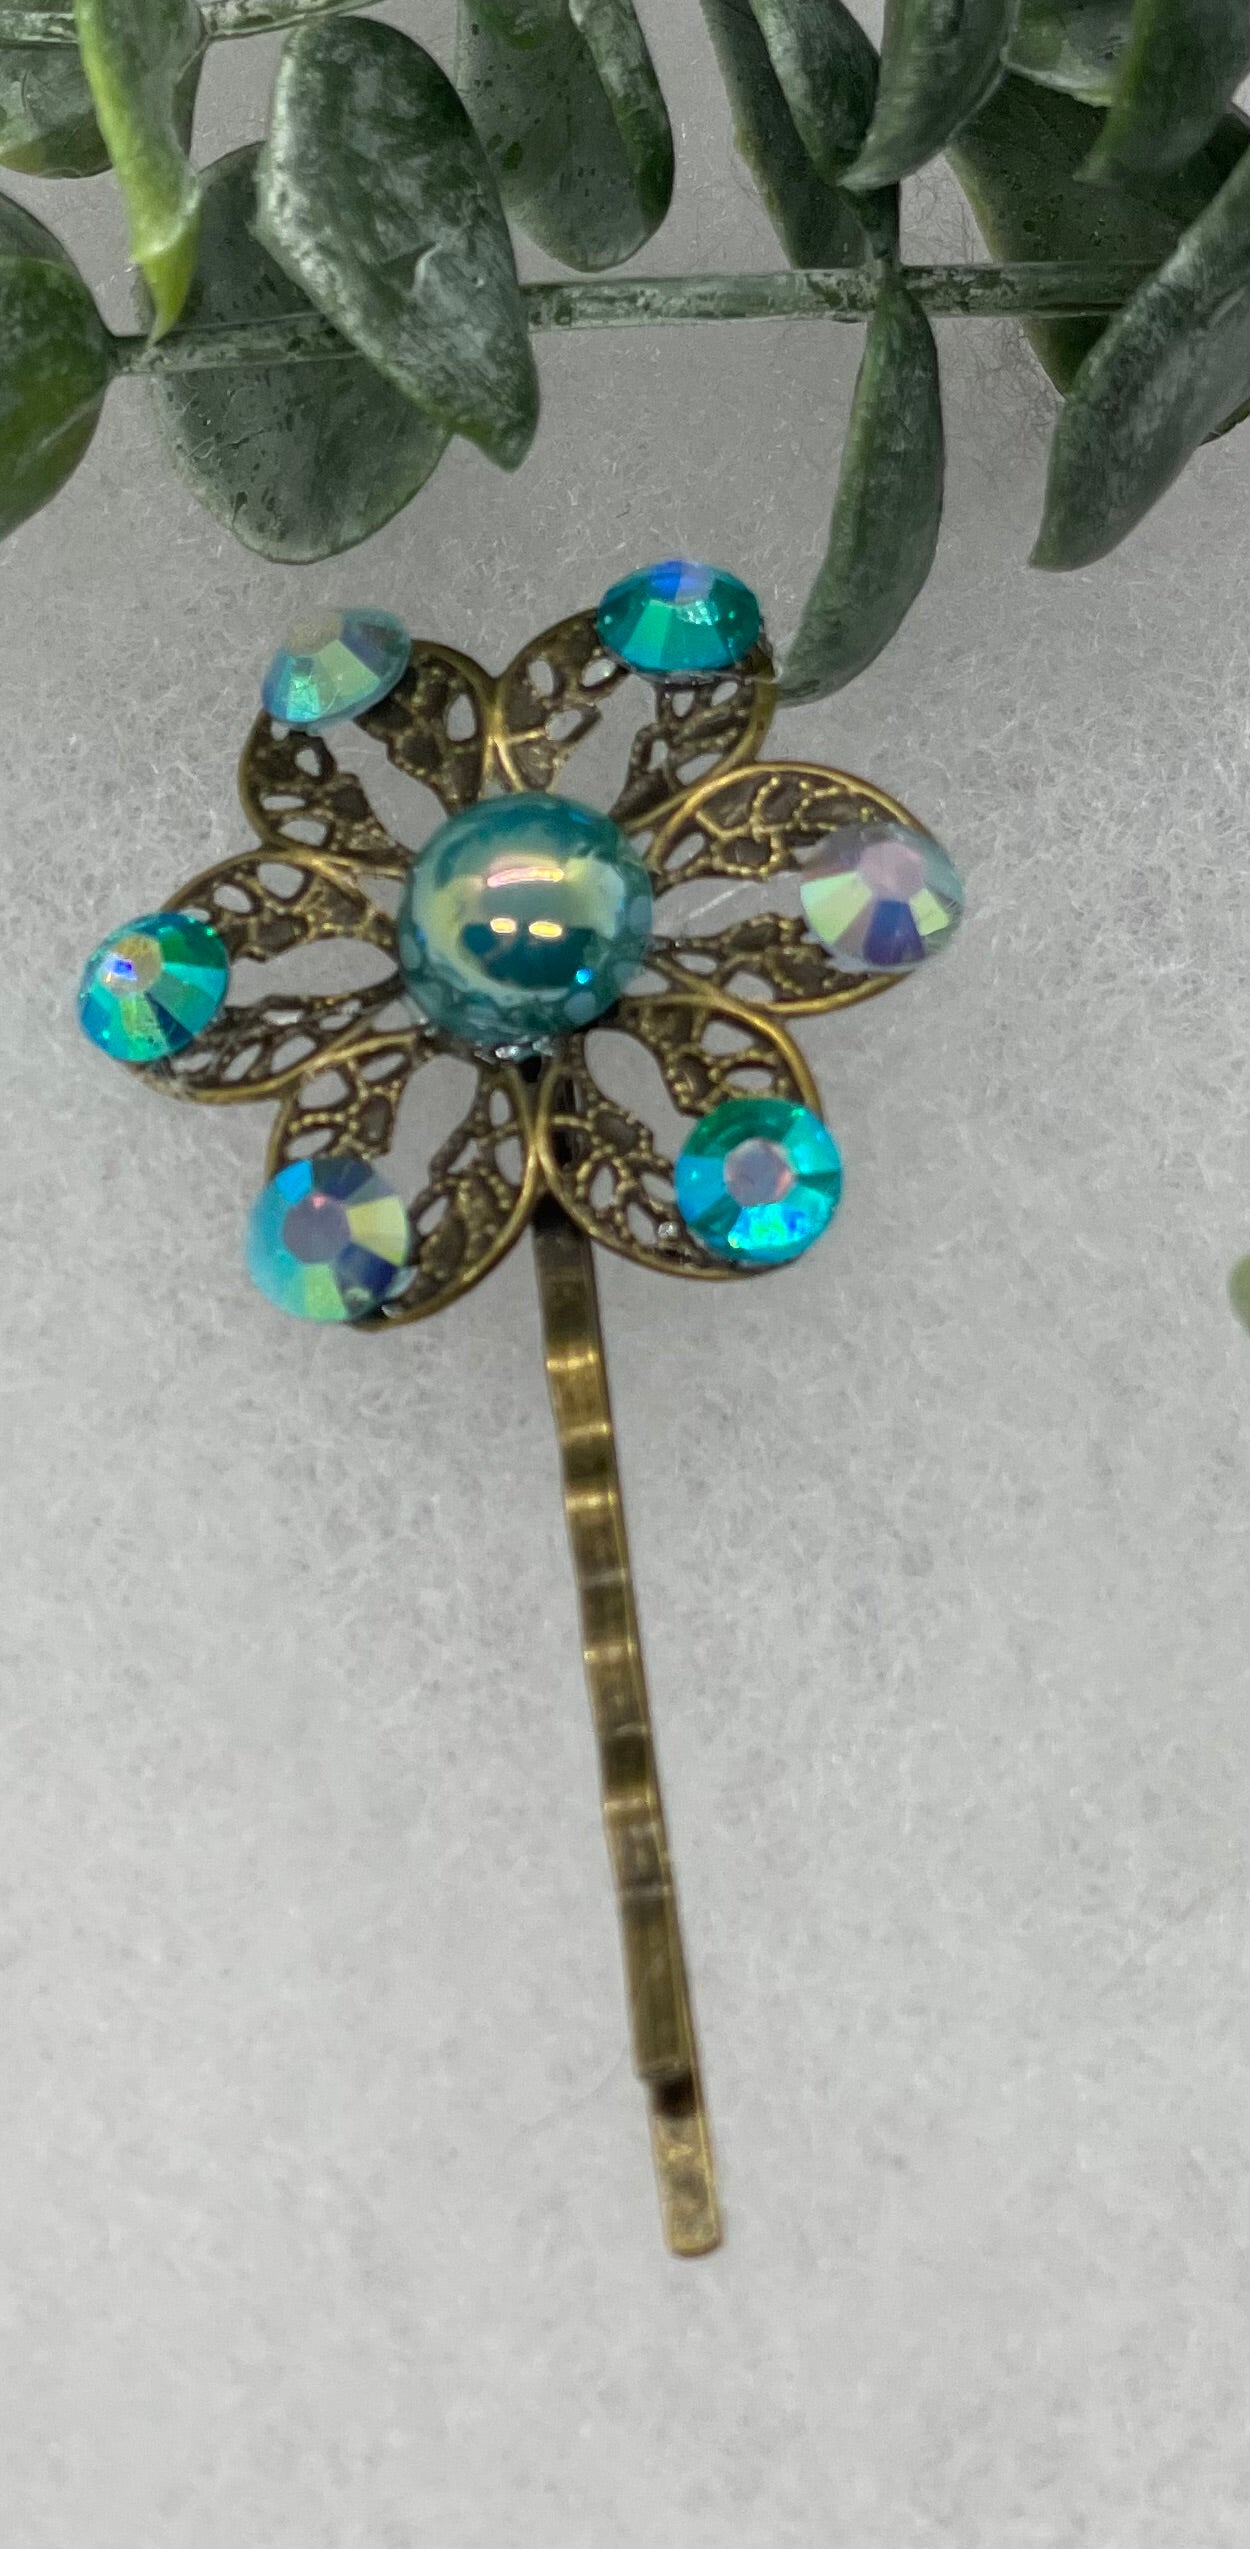 Teal crystal iridescent pearl Antique vintage Style approximately 3.0” flower hair pin wedding engagement bride princess formal hair accessory